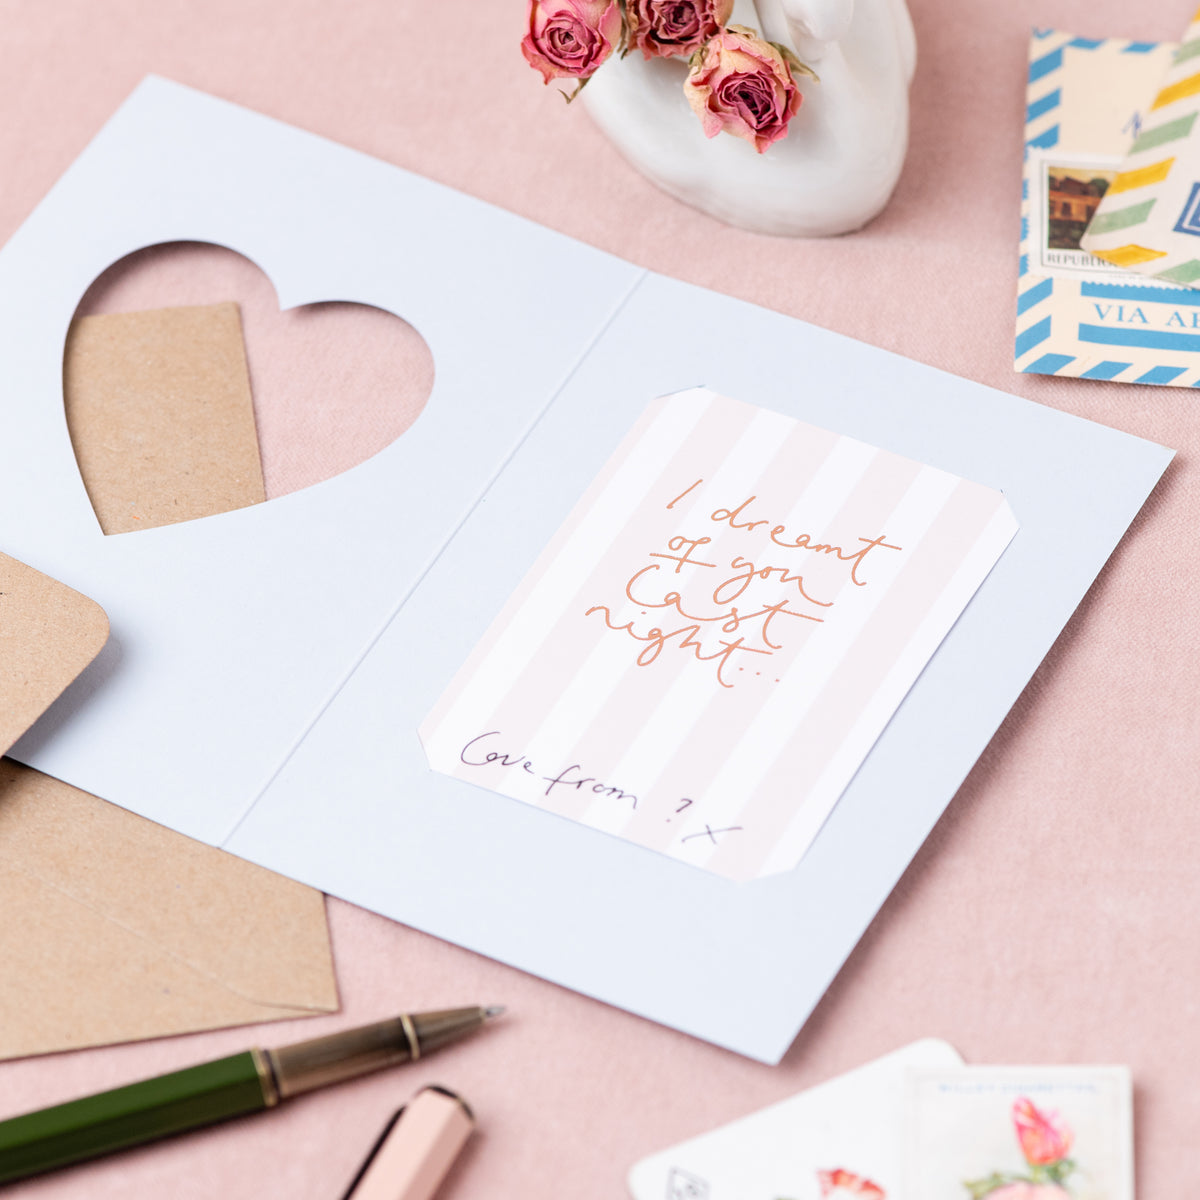 'I Dreamt About You Last Night...' Blue Cut Out Heart Card